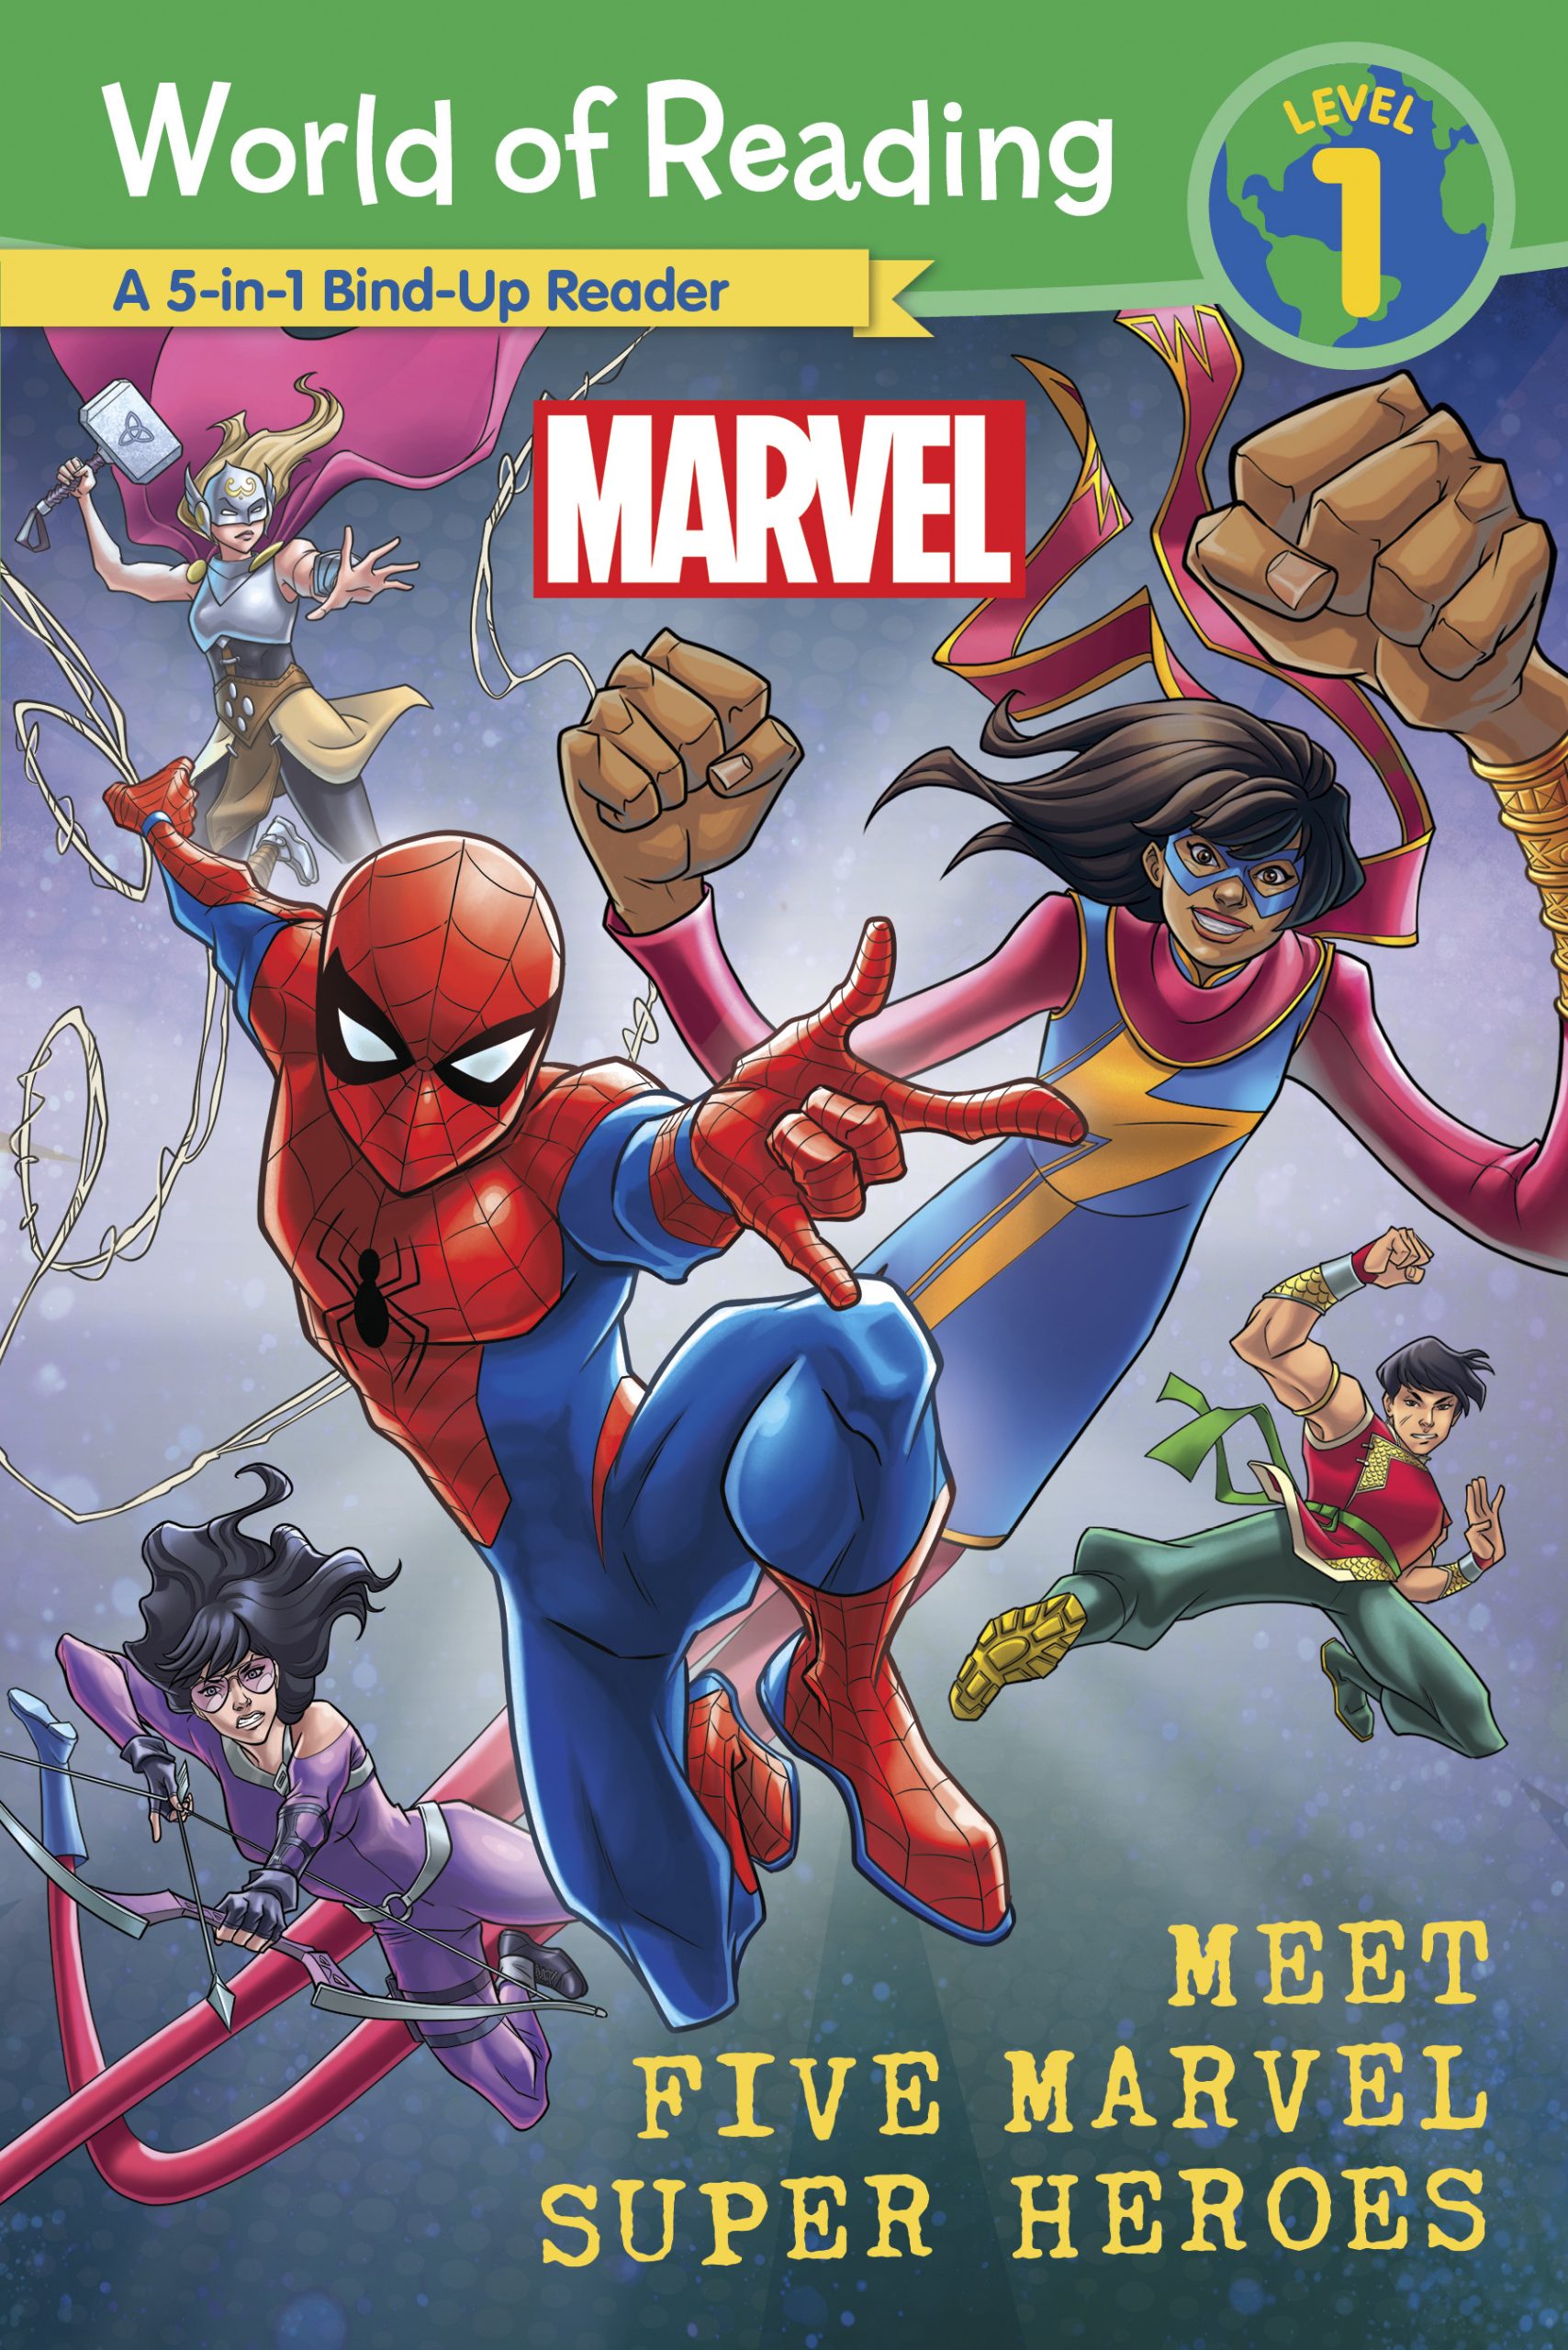 Meet Five Marvel Super Heroes World of Reading by Marvel Press